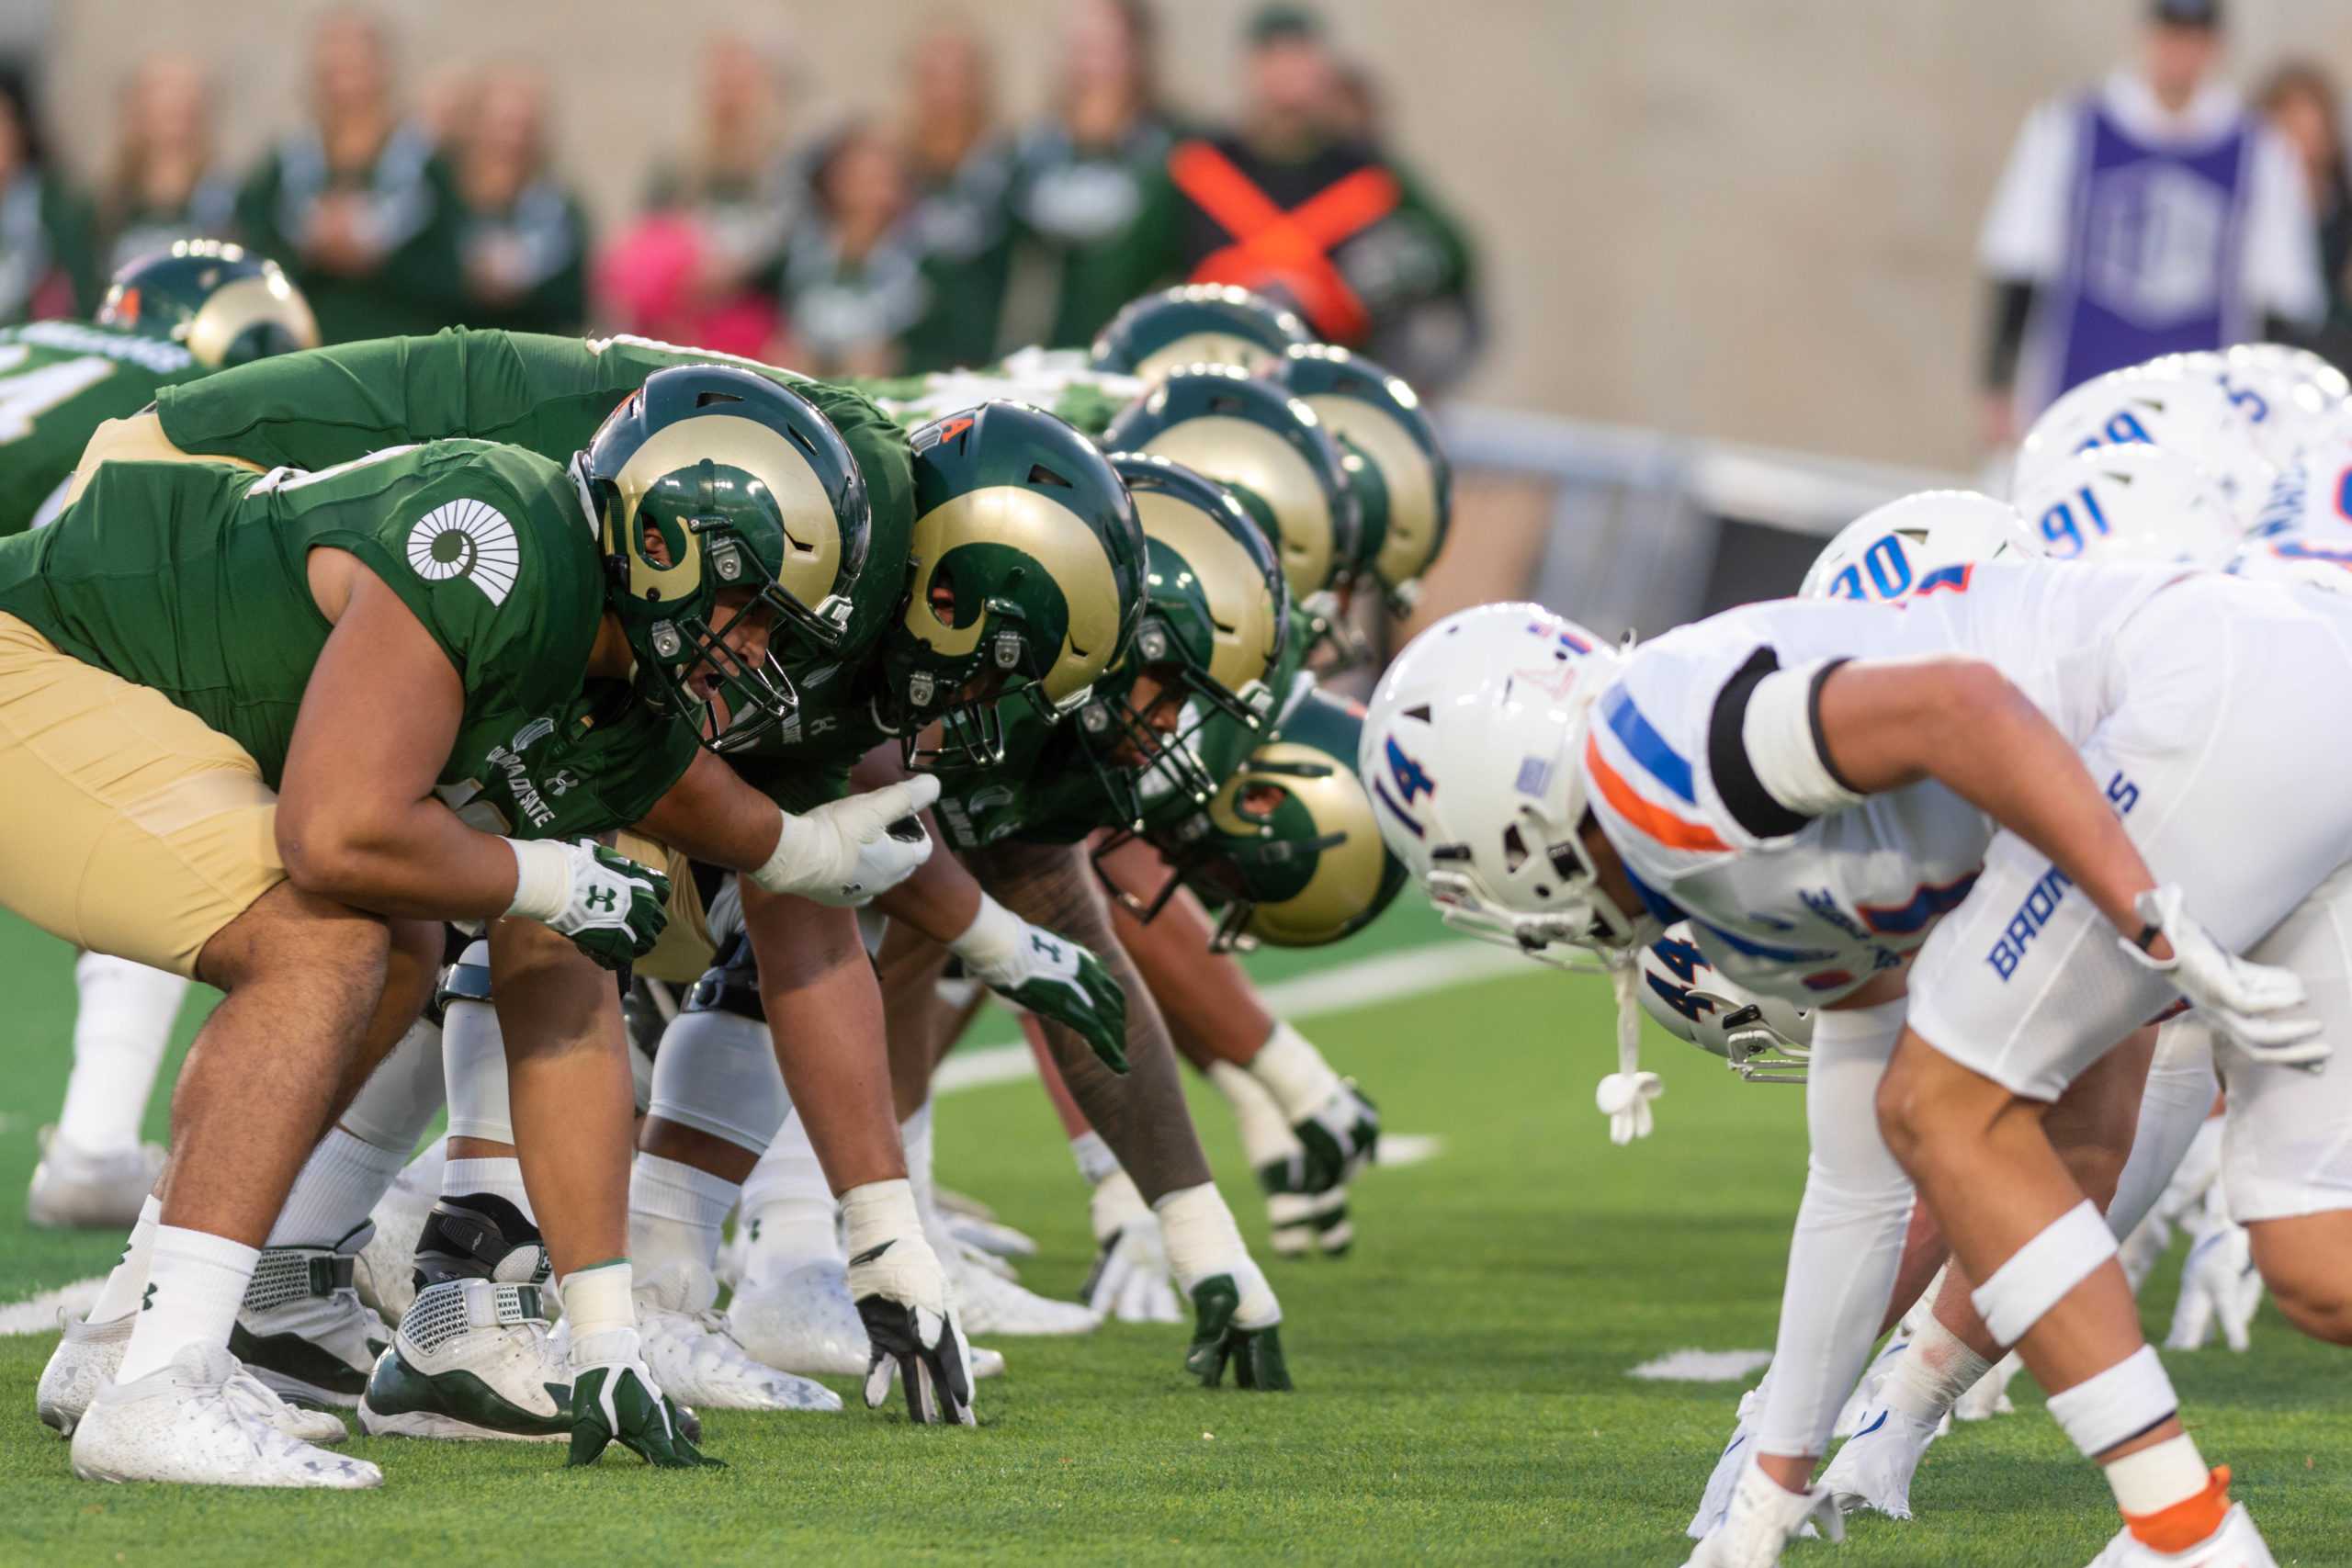 The Colorado State University offensive line faces off against the Boise State University defensive line in the football game in Fort Collins, CO. Oct 30th.